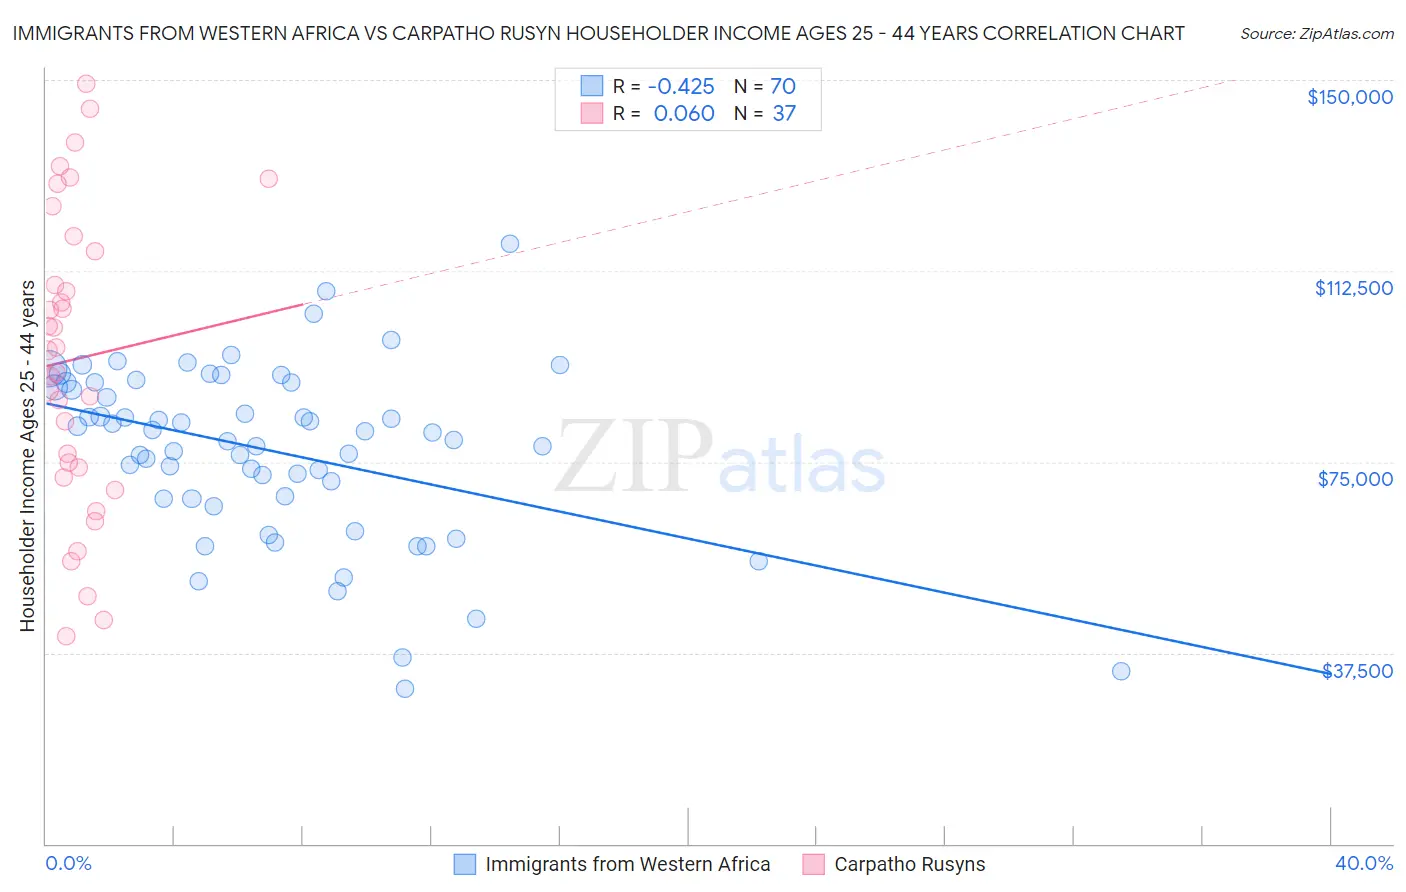 Immigrants from Western Africa vs Carpatho Rusyn Householder Income Ages 25 - 44 years